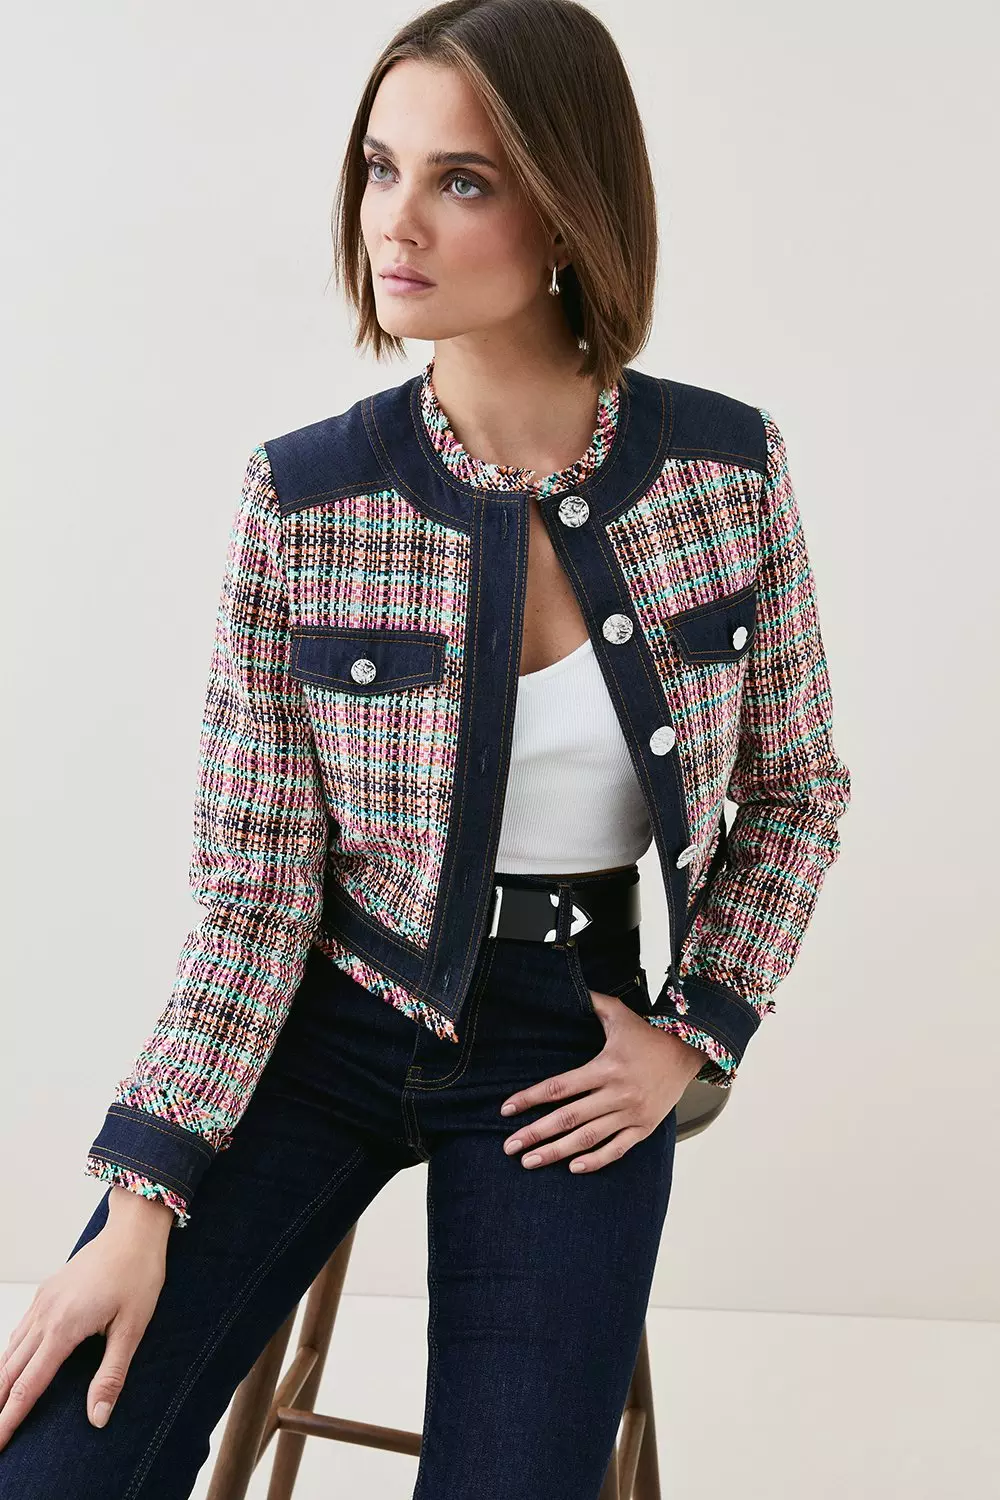 A modern take on tweed: 4 styles under $40 - Anchored In Elegance